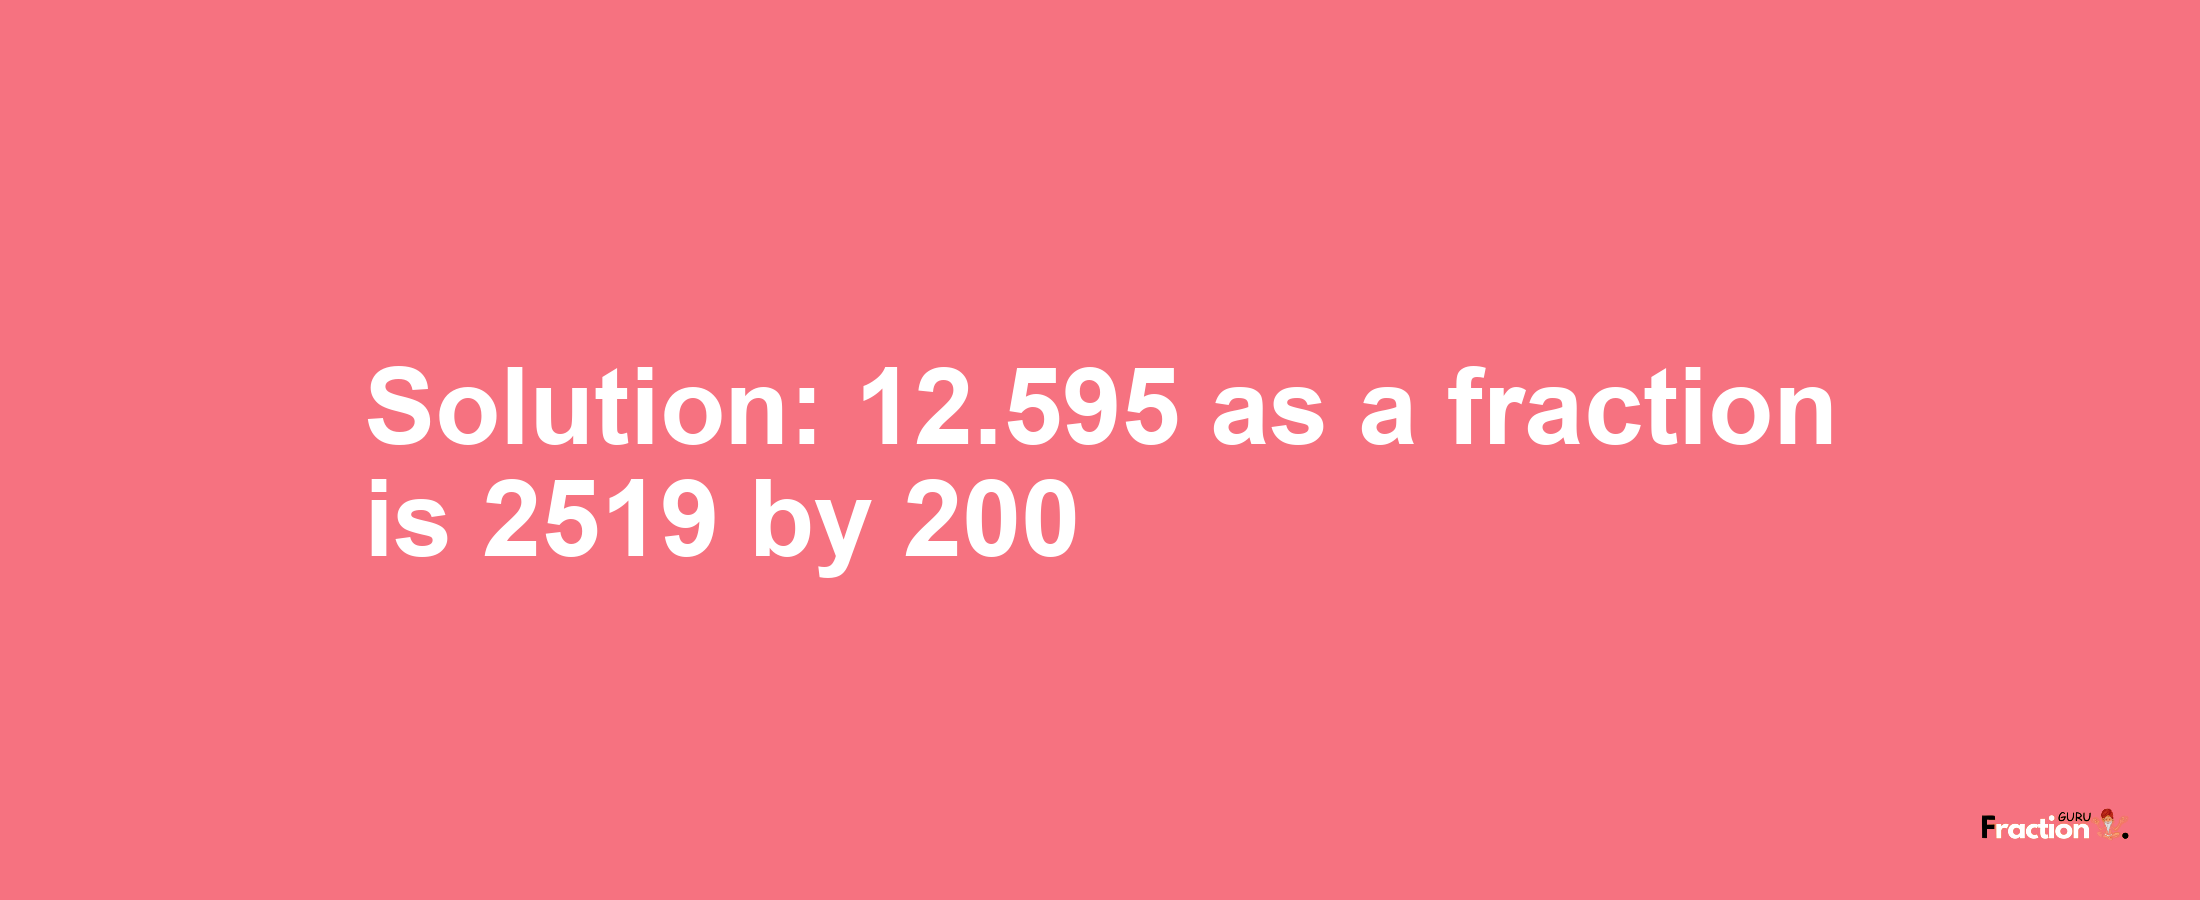 Solution:12.595 as a fraction is 2519/200